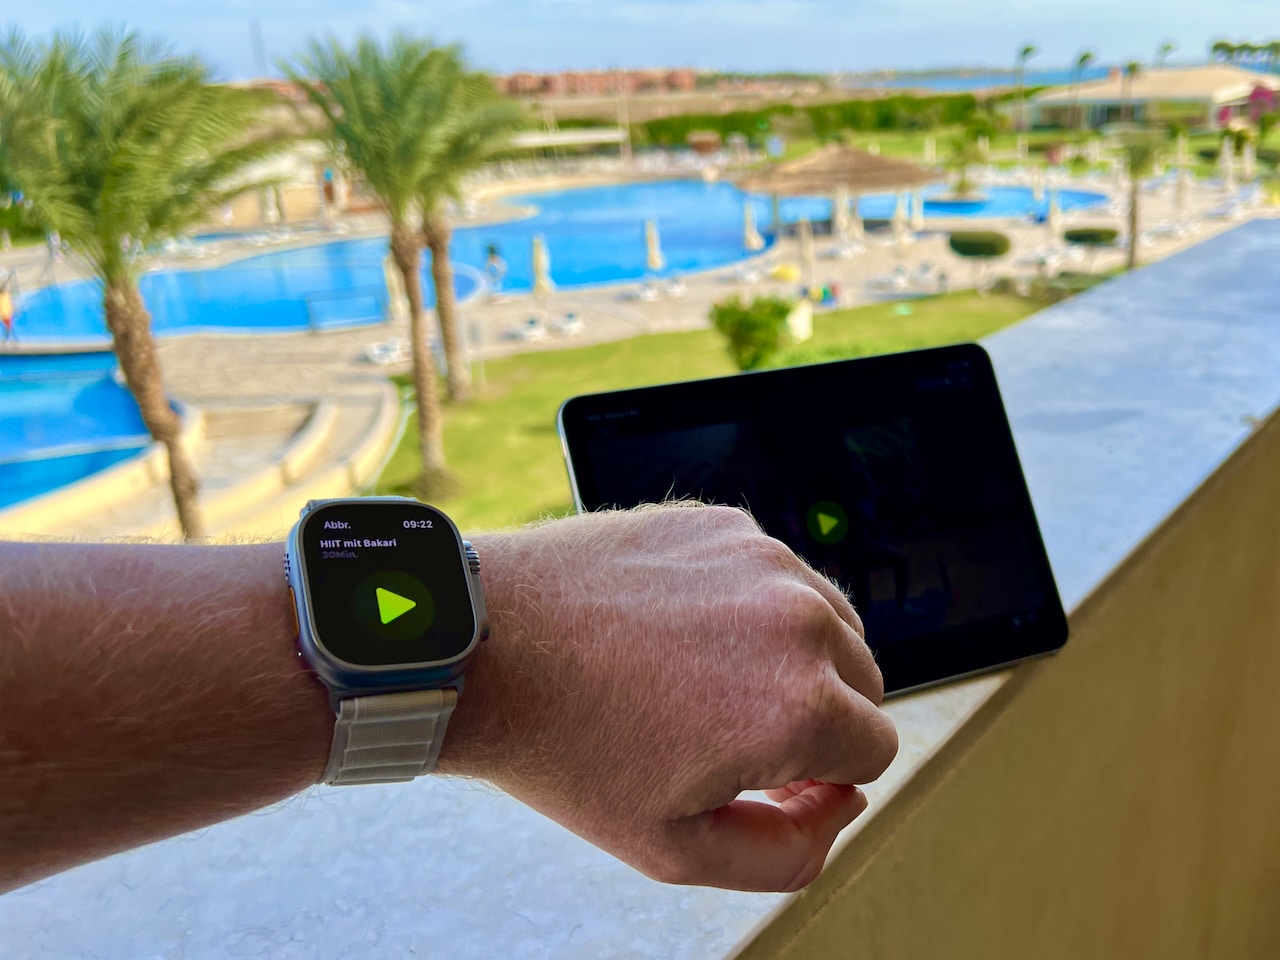 My personal Apple Watch Experiences – I use smartwatch models very intensively and usually only take off the sports watch to charge it. Photo: Sascha Tegtmeyer I have all the models that have been released so far Apple Watch used and tested. Smartwatches have proven themselves as a navigation aid and information center, especially when travelling. They have also proven their worth in sports and have given me valuable information about my activities. I just don't have the latest models like that Apple Watch Ultra, Apple Watch Series 6 and the Apple Watch SE tested but also older versions like that Apple Watch Series 3 and the Apple Watch Series 4 used. Based on my extensive experience, I can say that the Apple Watch is one of the best smartwatches out there, especially for fitness and health.